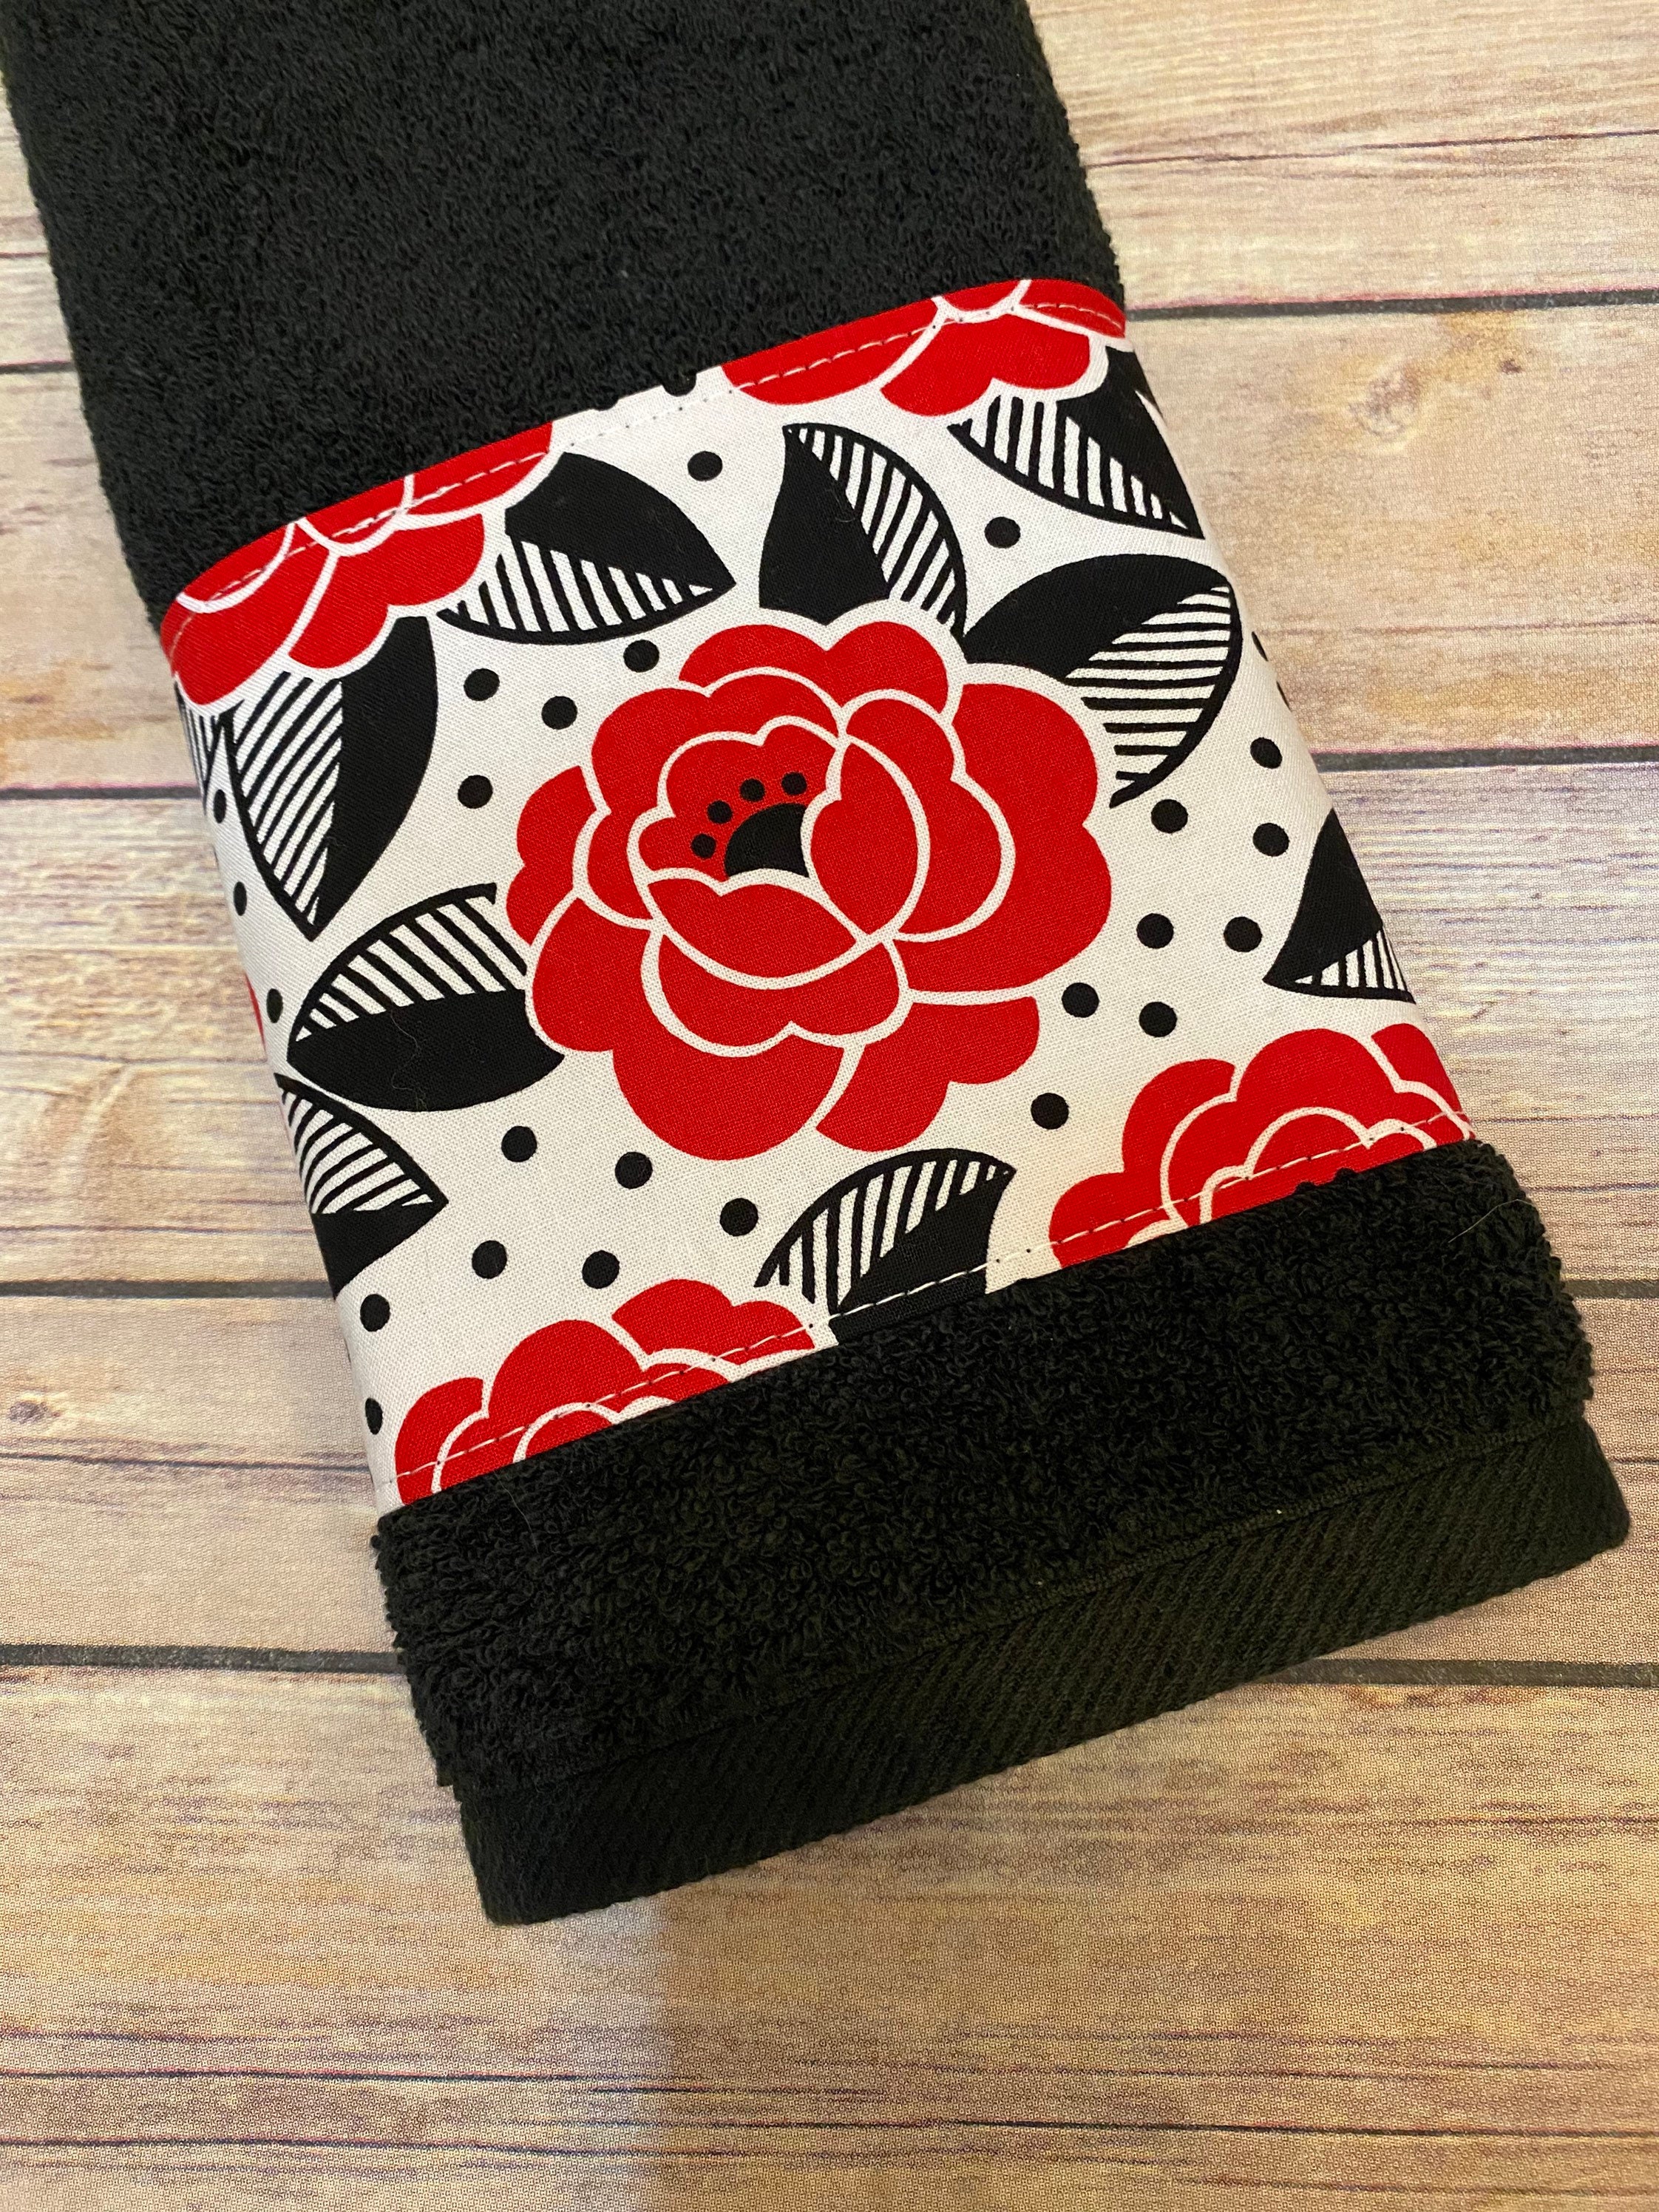 Black and Red Bath Towels in 6 Sizes Red Roses Made Just for You by August  Ave Towels, Bathroom Hand and Bath Towels in Black White and Red 